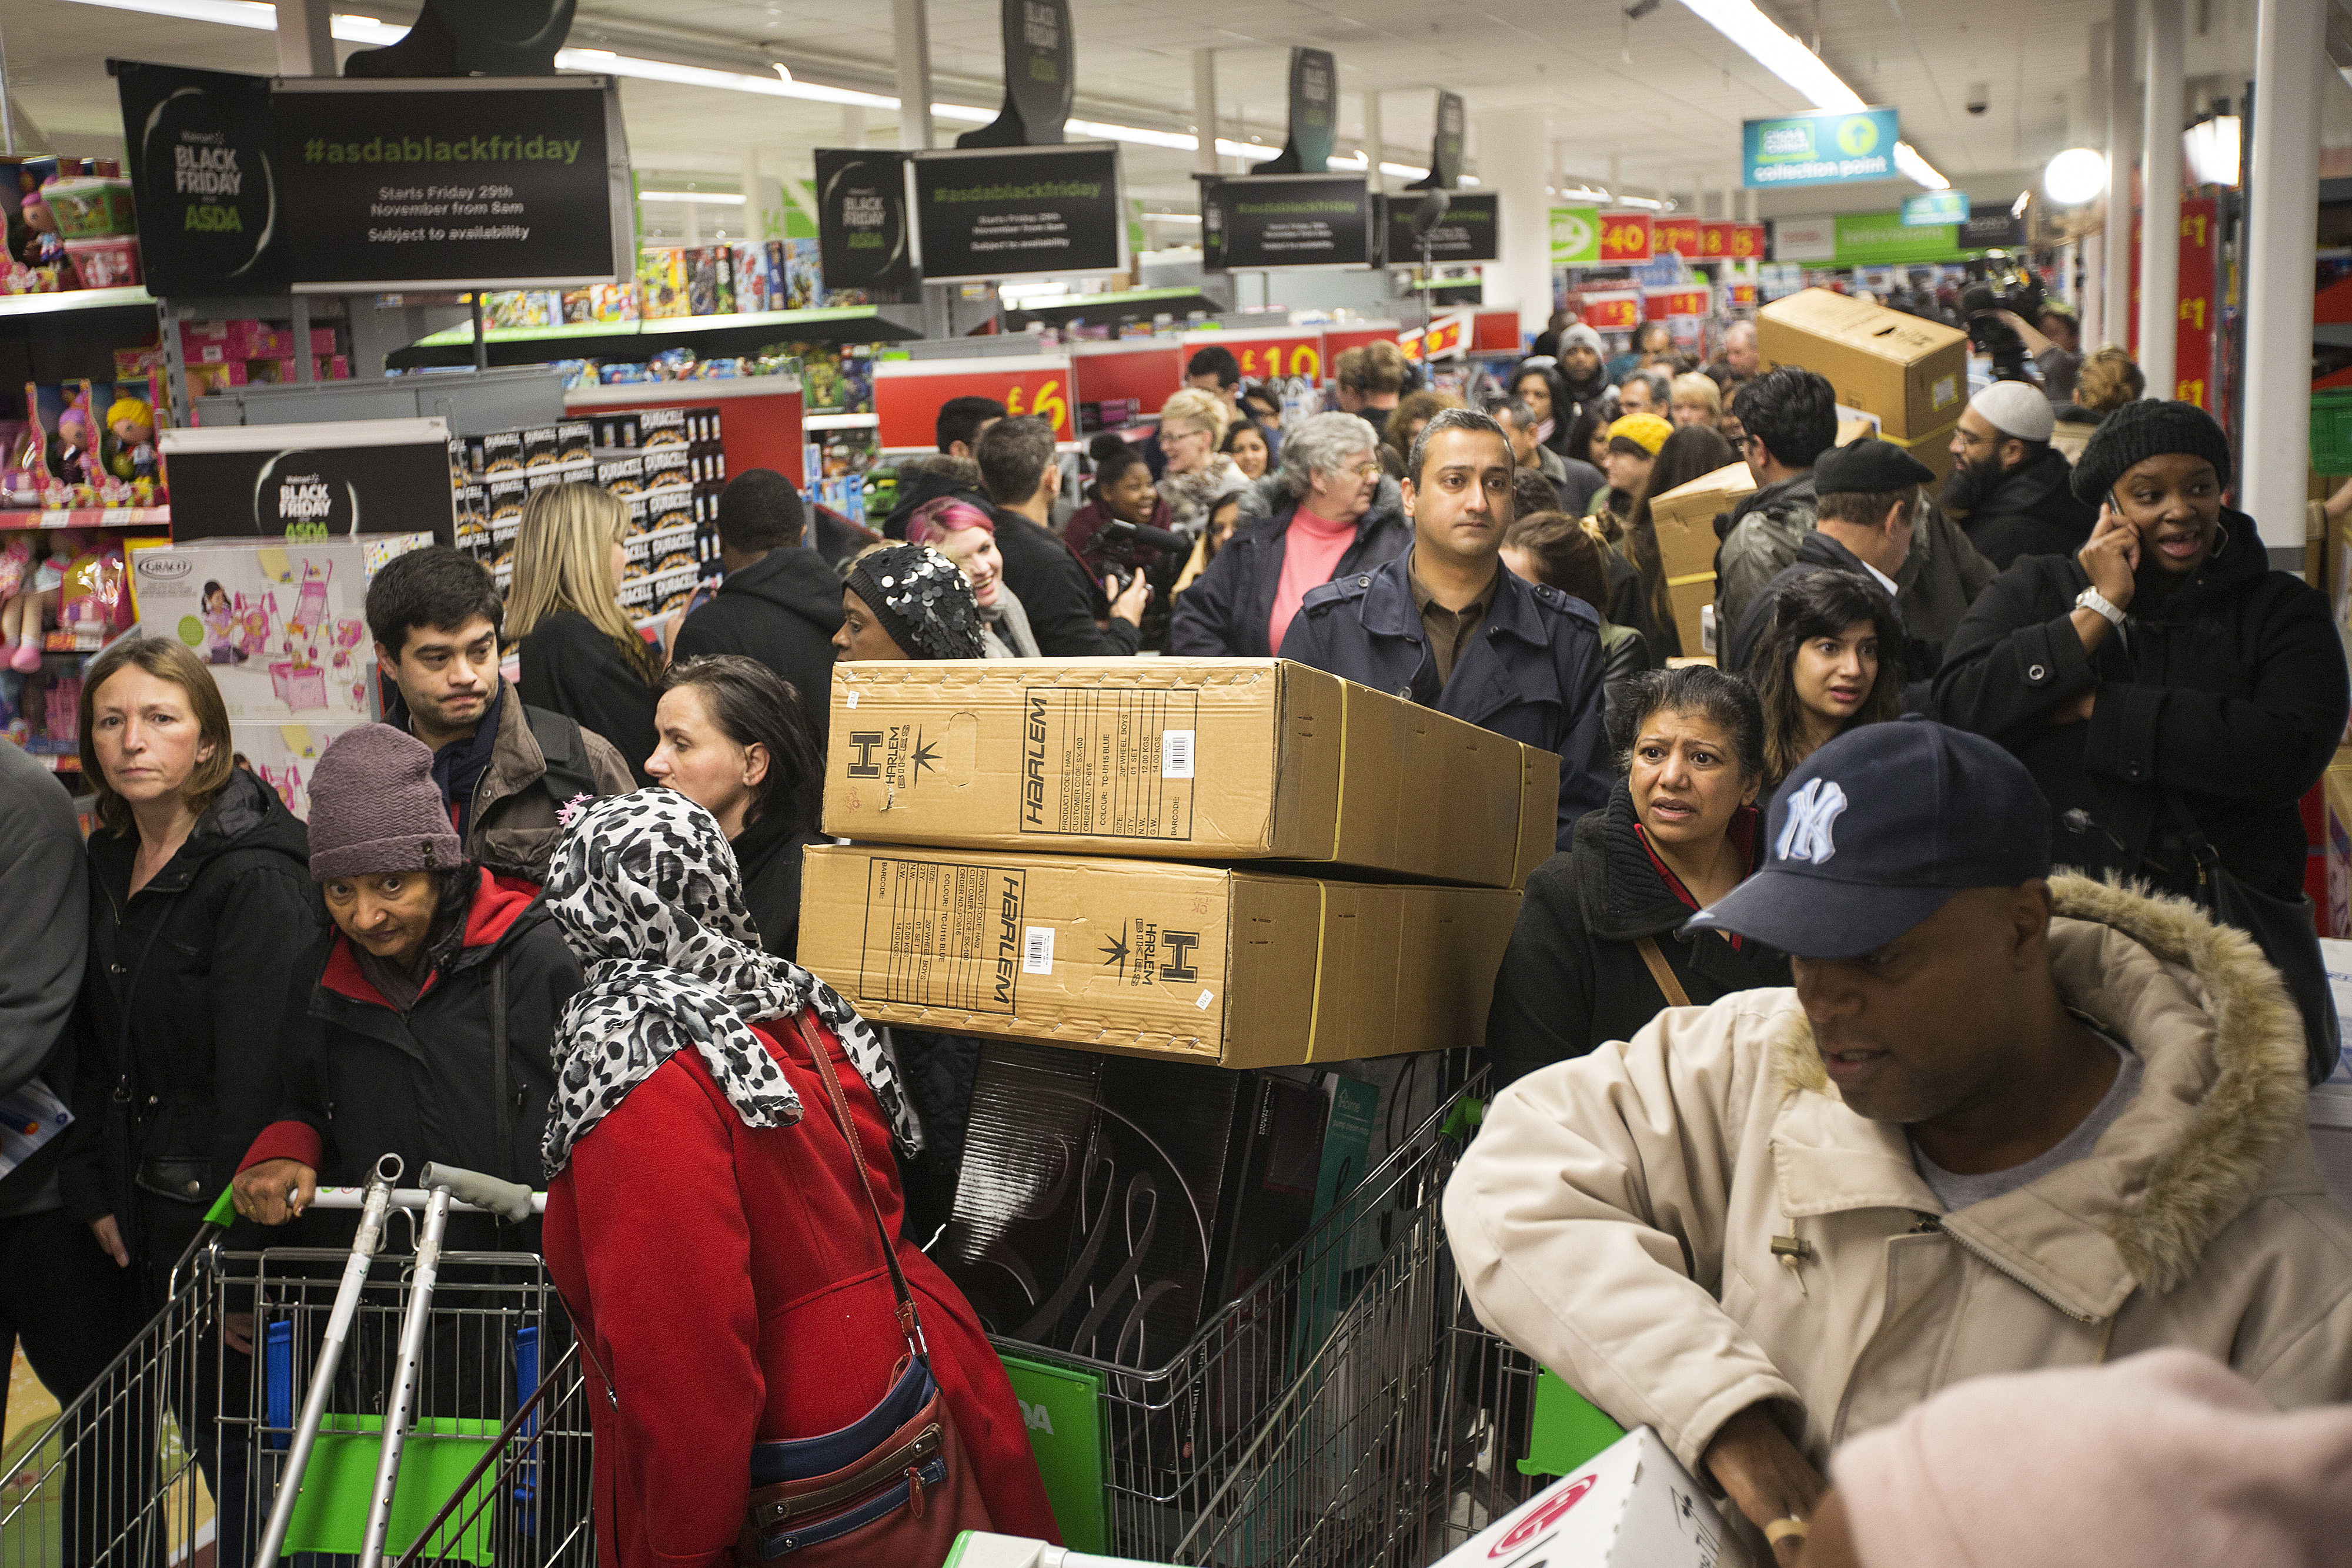 Customers push loaded shopping carts through crowded aisles as they look for bargains during a Black Friday discount sale inside an Asda supermarket in Wembley, London, U.K., on Friday, Nov. 29, 2013. (Bloomberg&mdash;Bloomberg via Getty Images)